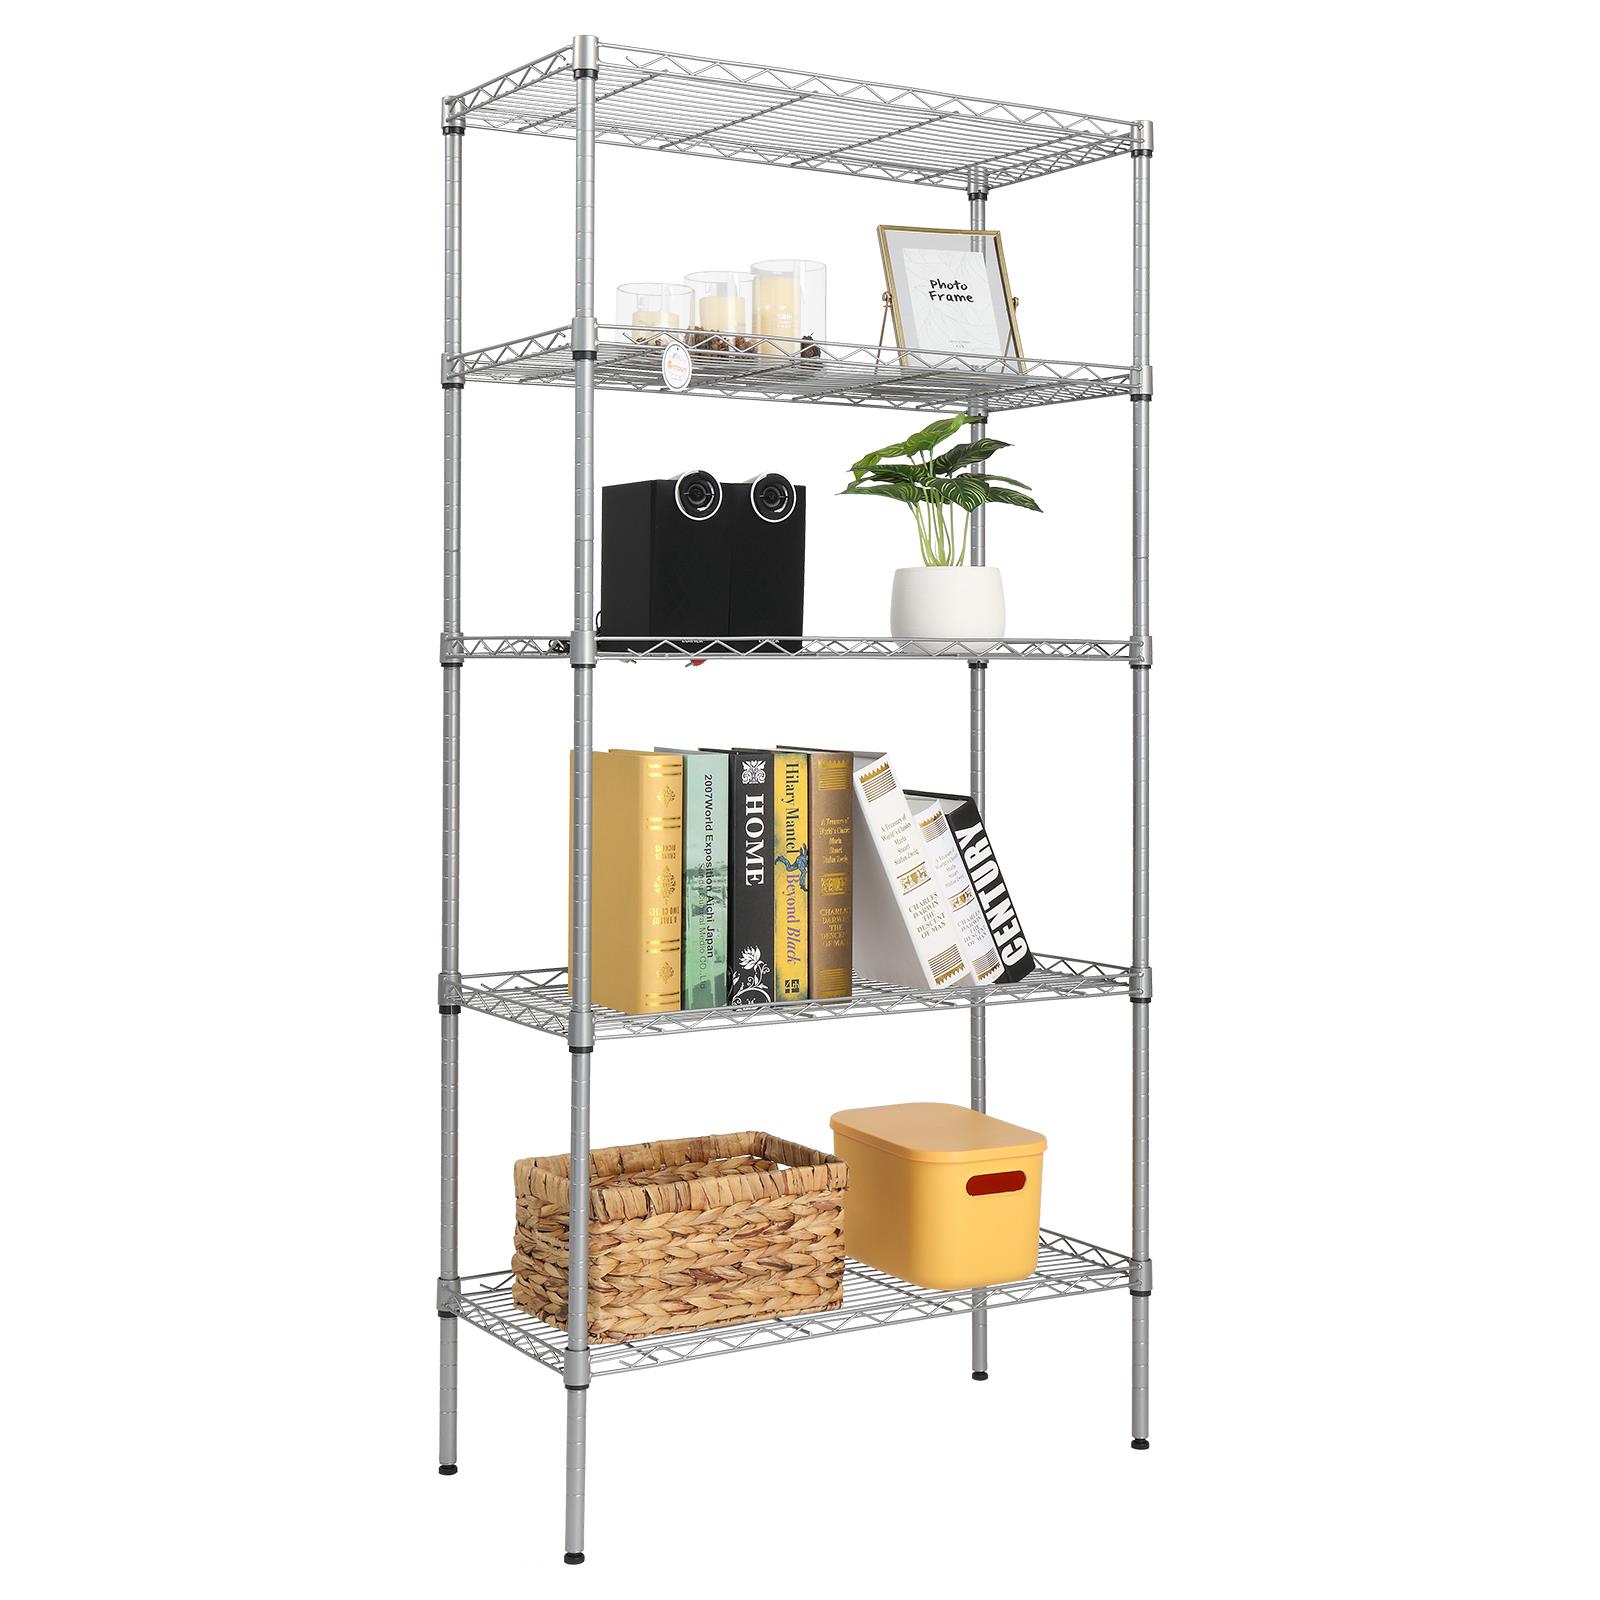 Ktaxon 5-Tier Wire Shelving Unit, Steel Storage Rack for Office Kitchen 30" W x 14" D x 60" H, Silver - image 4 of 9